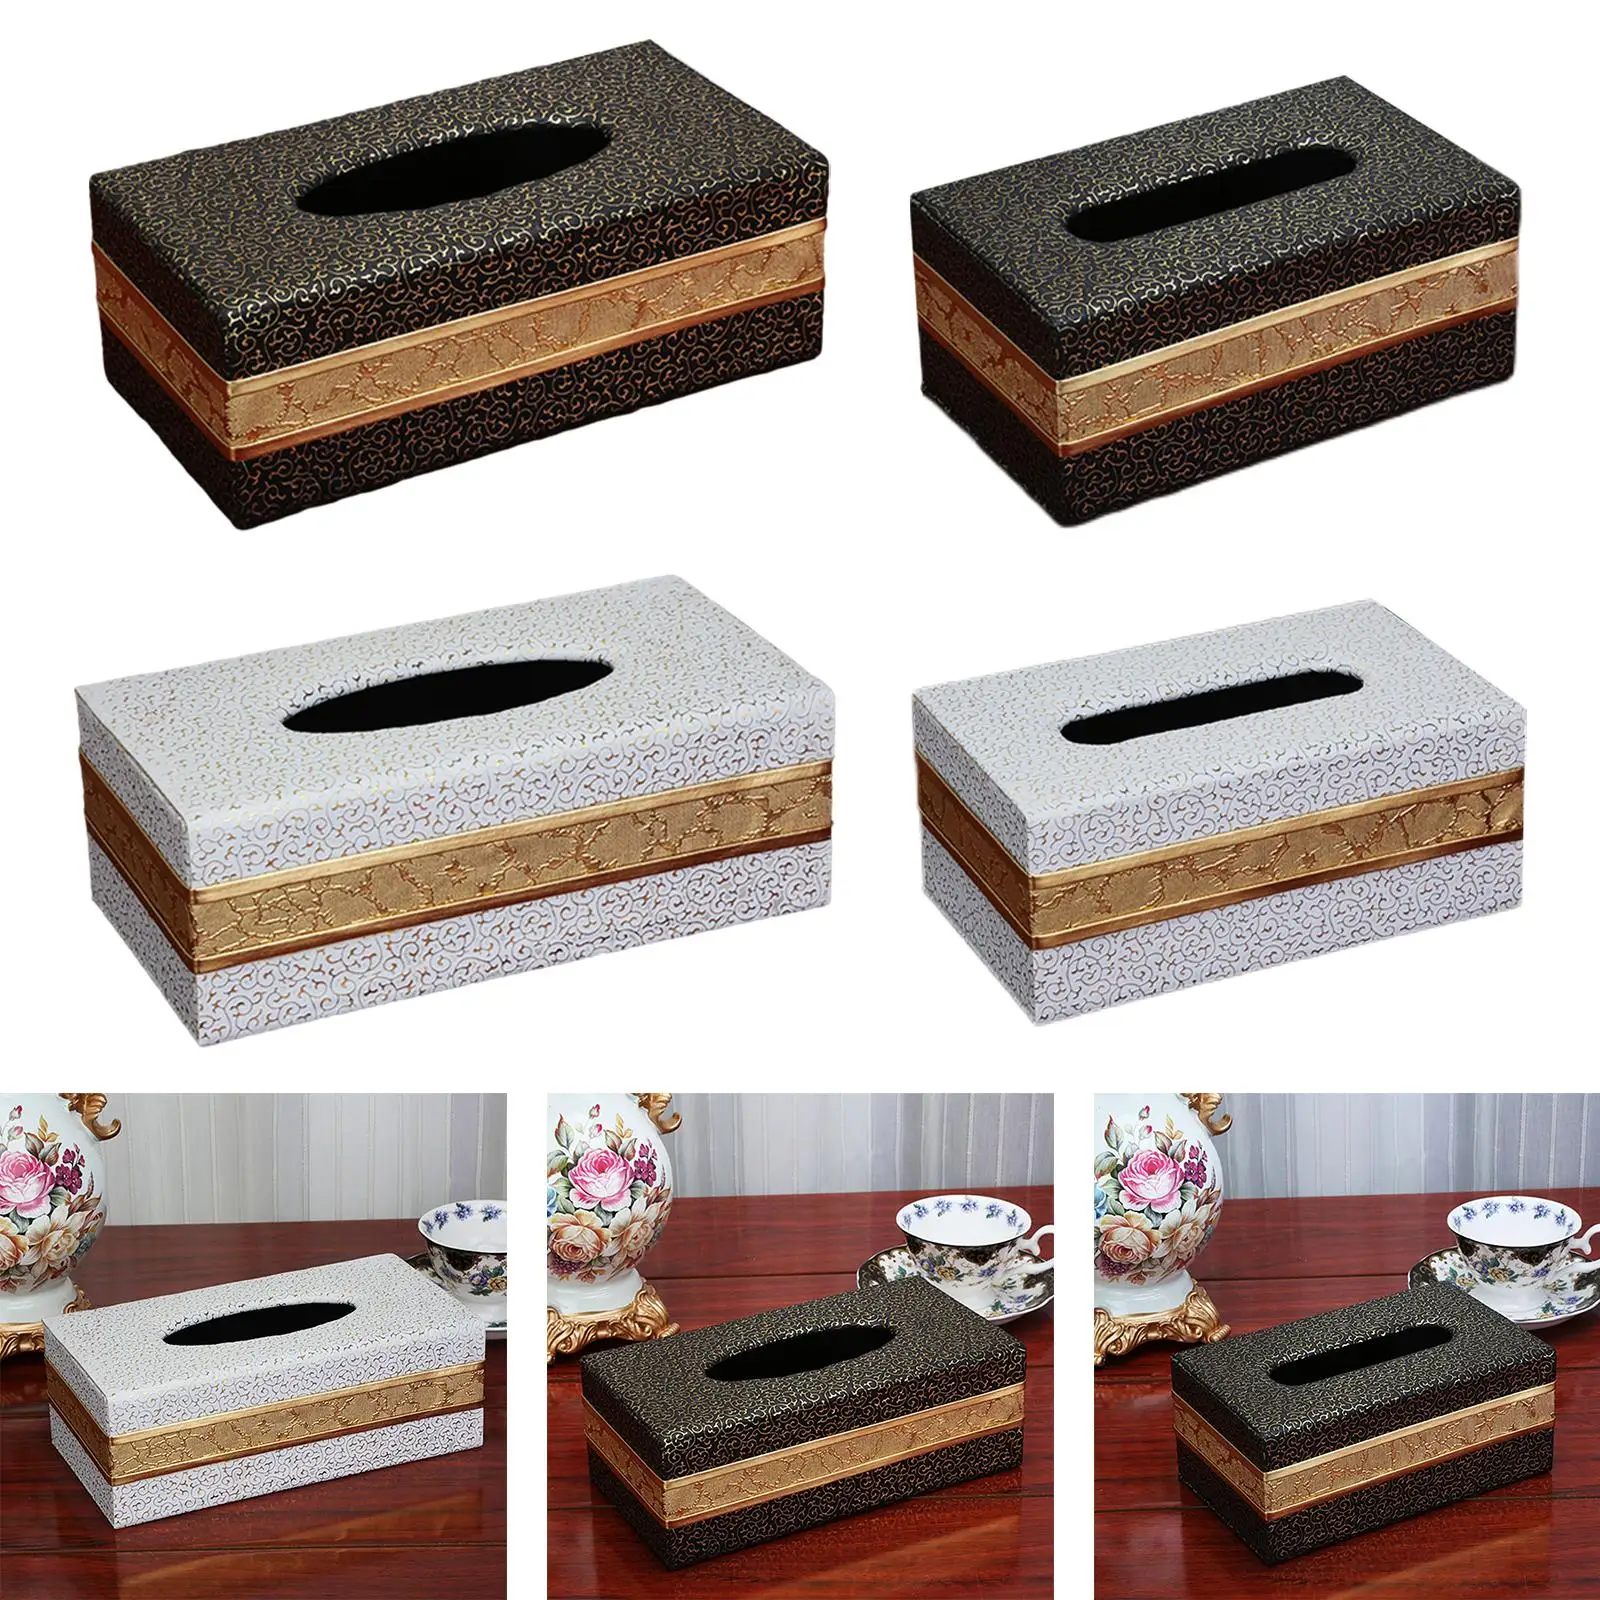 PU Leather Tissue Box Holder Organizer with Magnetic Bottom Pumping  Rectangular Tissue  for Hotel Dresser Bedroom Car